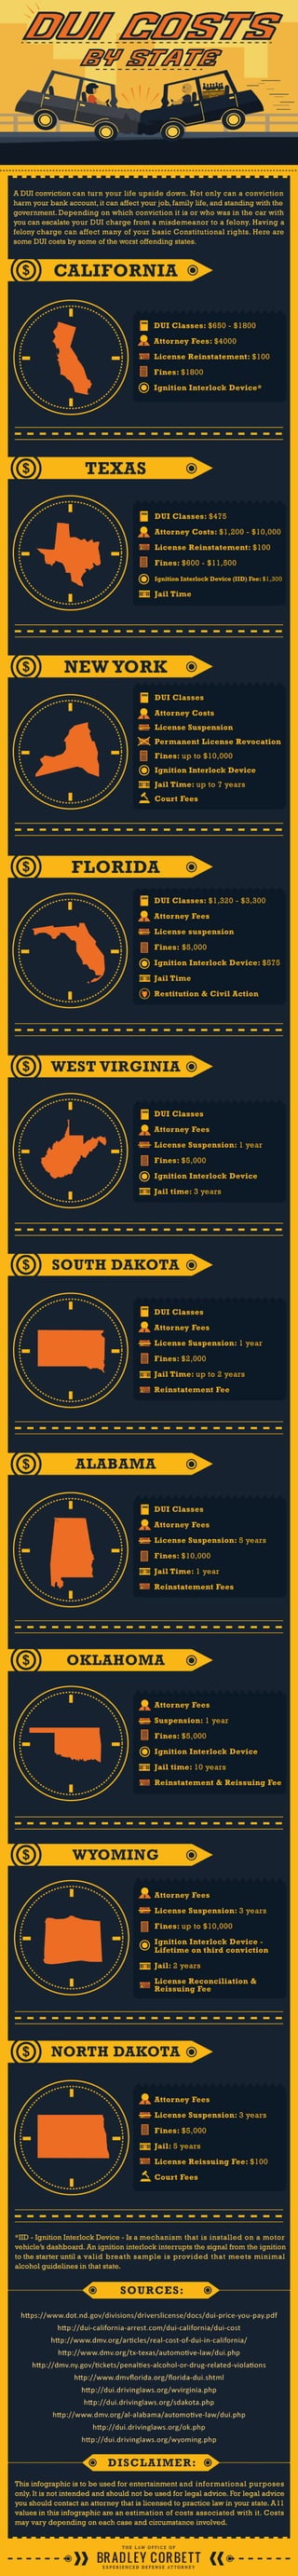 DUI/DWI Costs by state